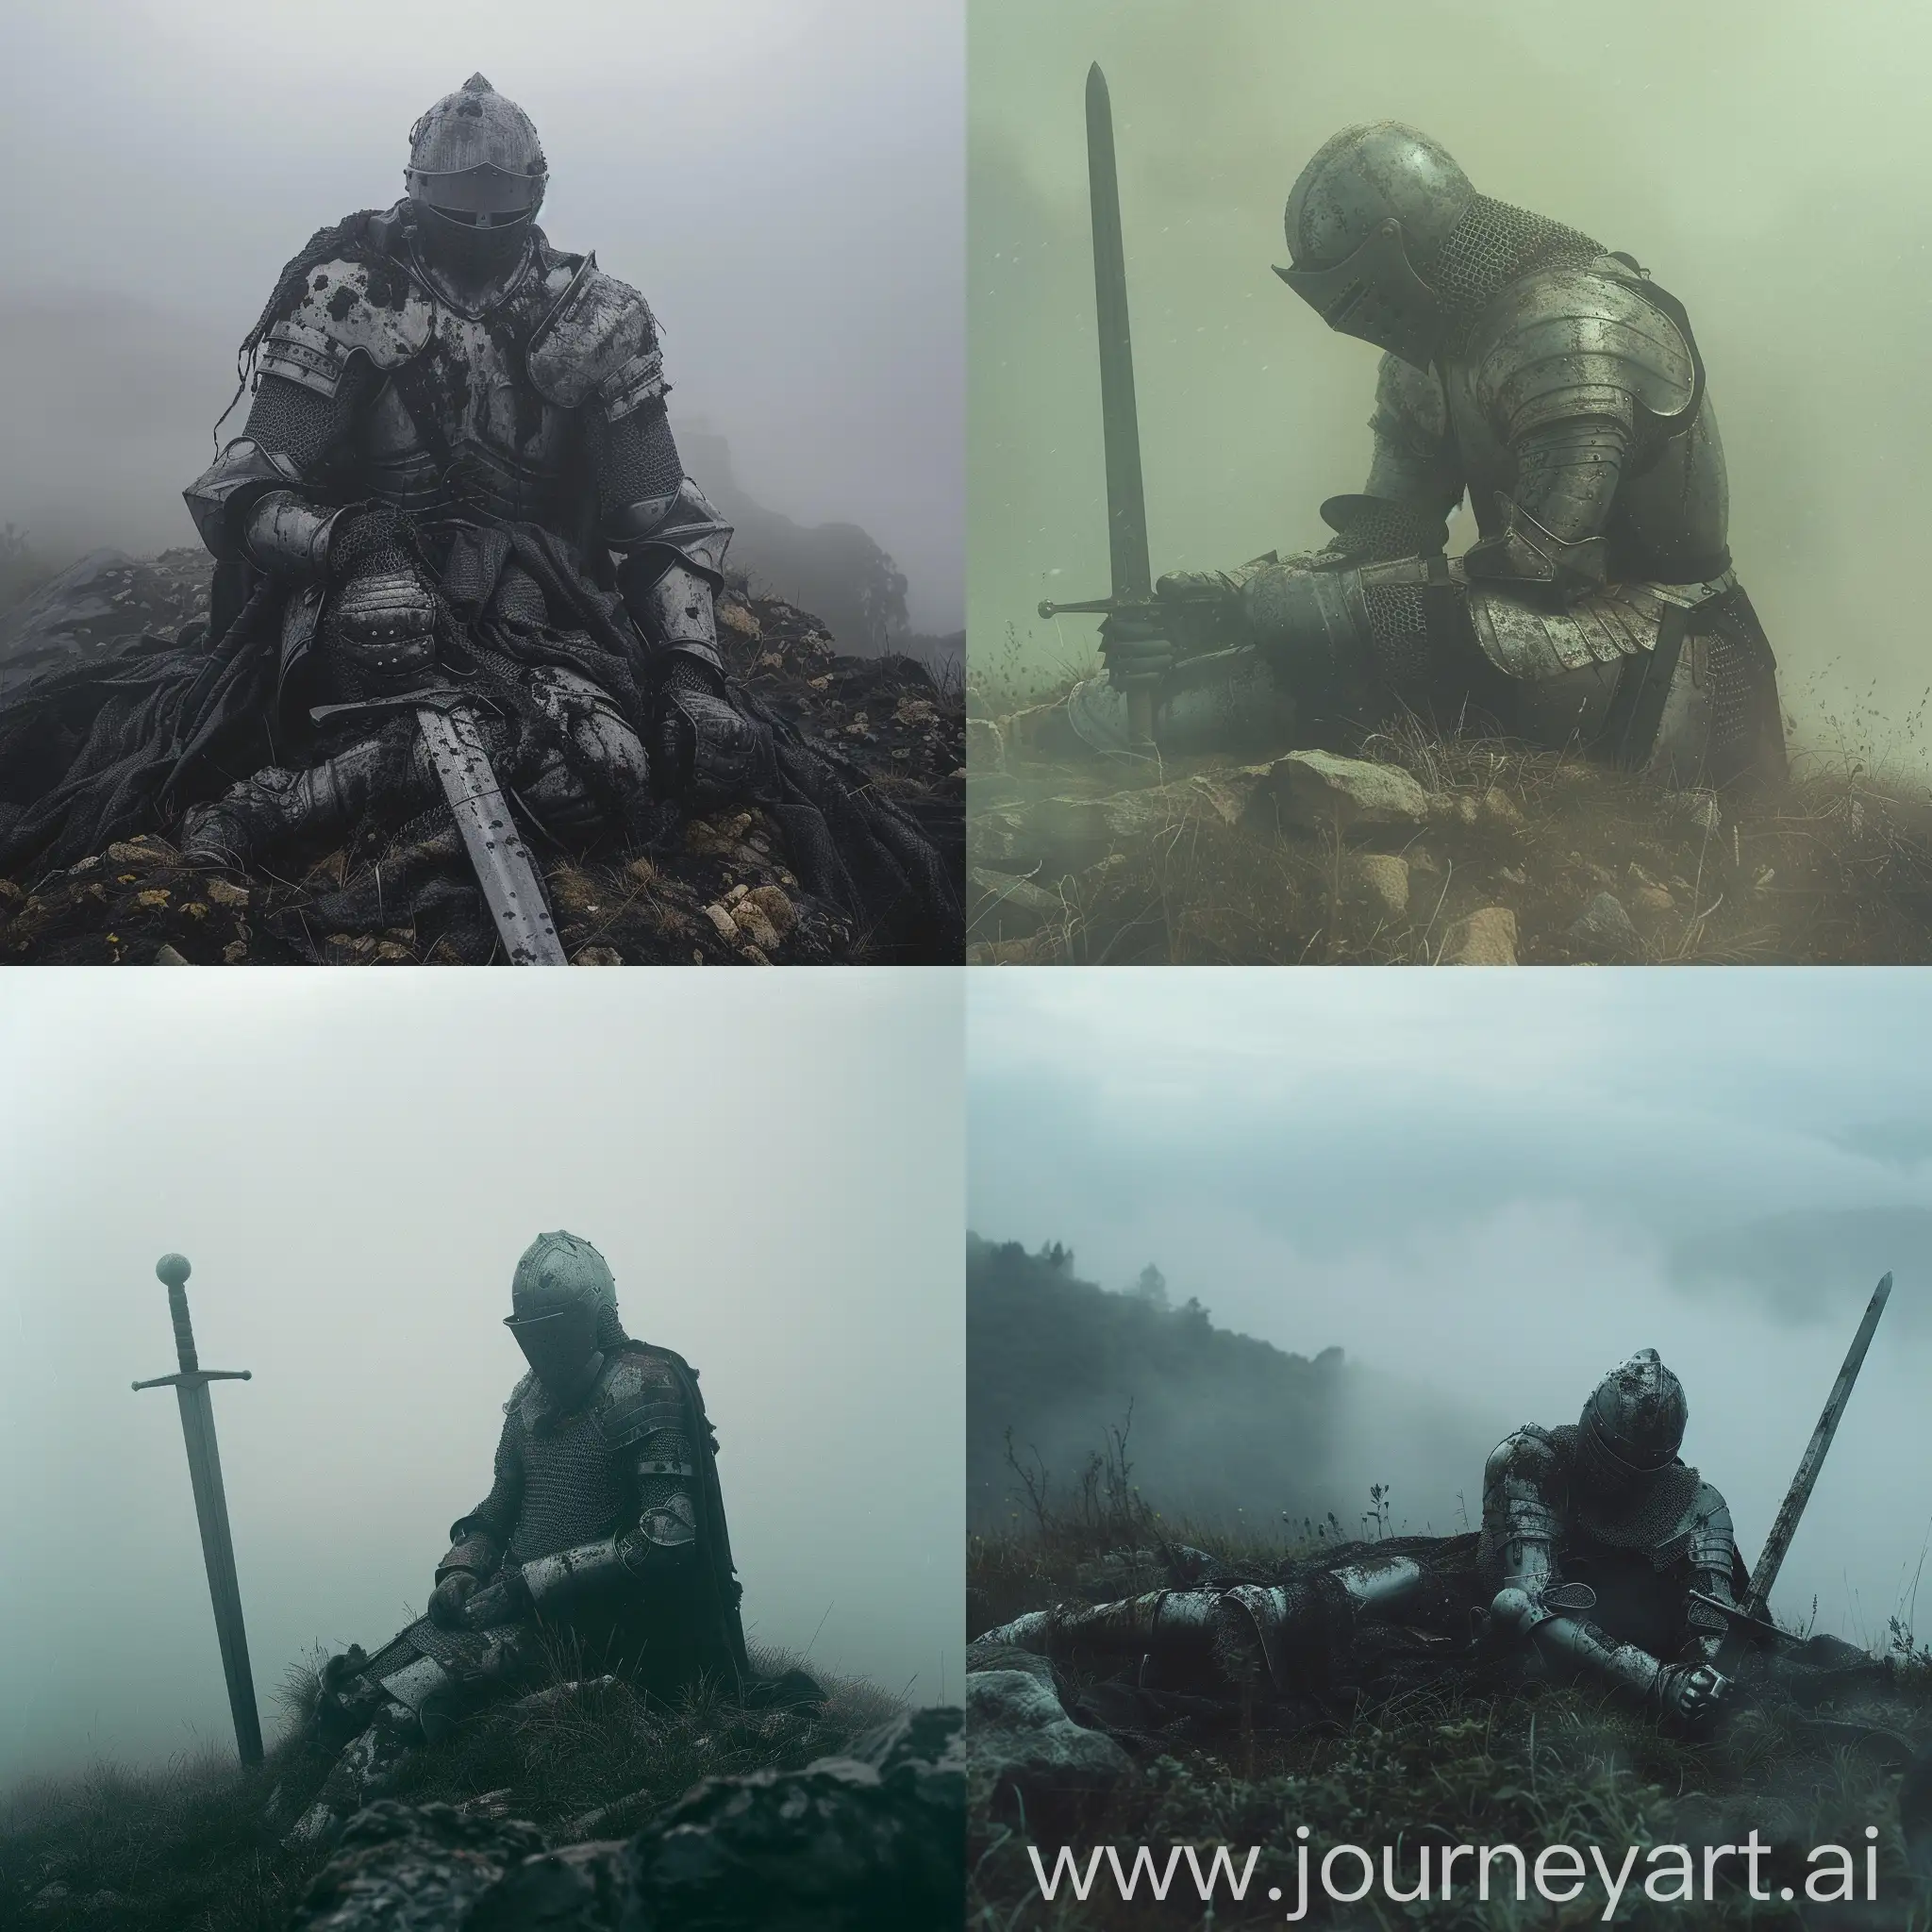 Helmeted-Knight-Resting-on-Misty-Hill-in-80s-Movie-Style